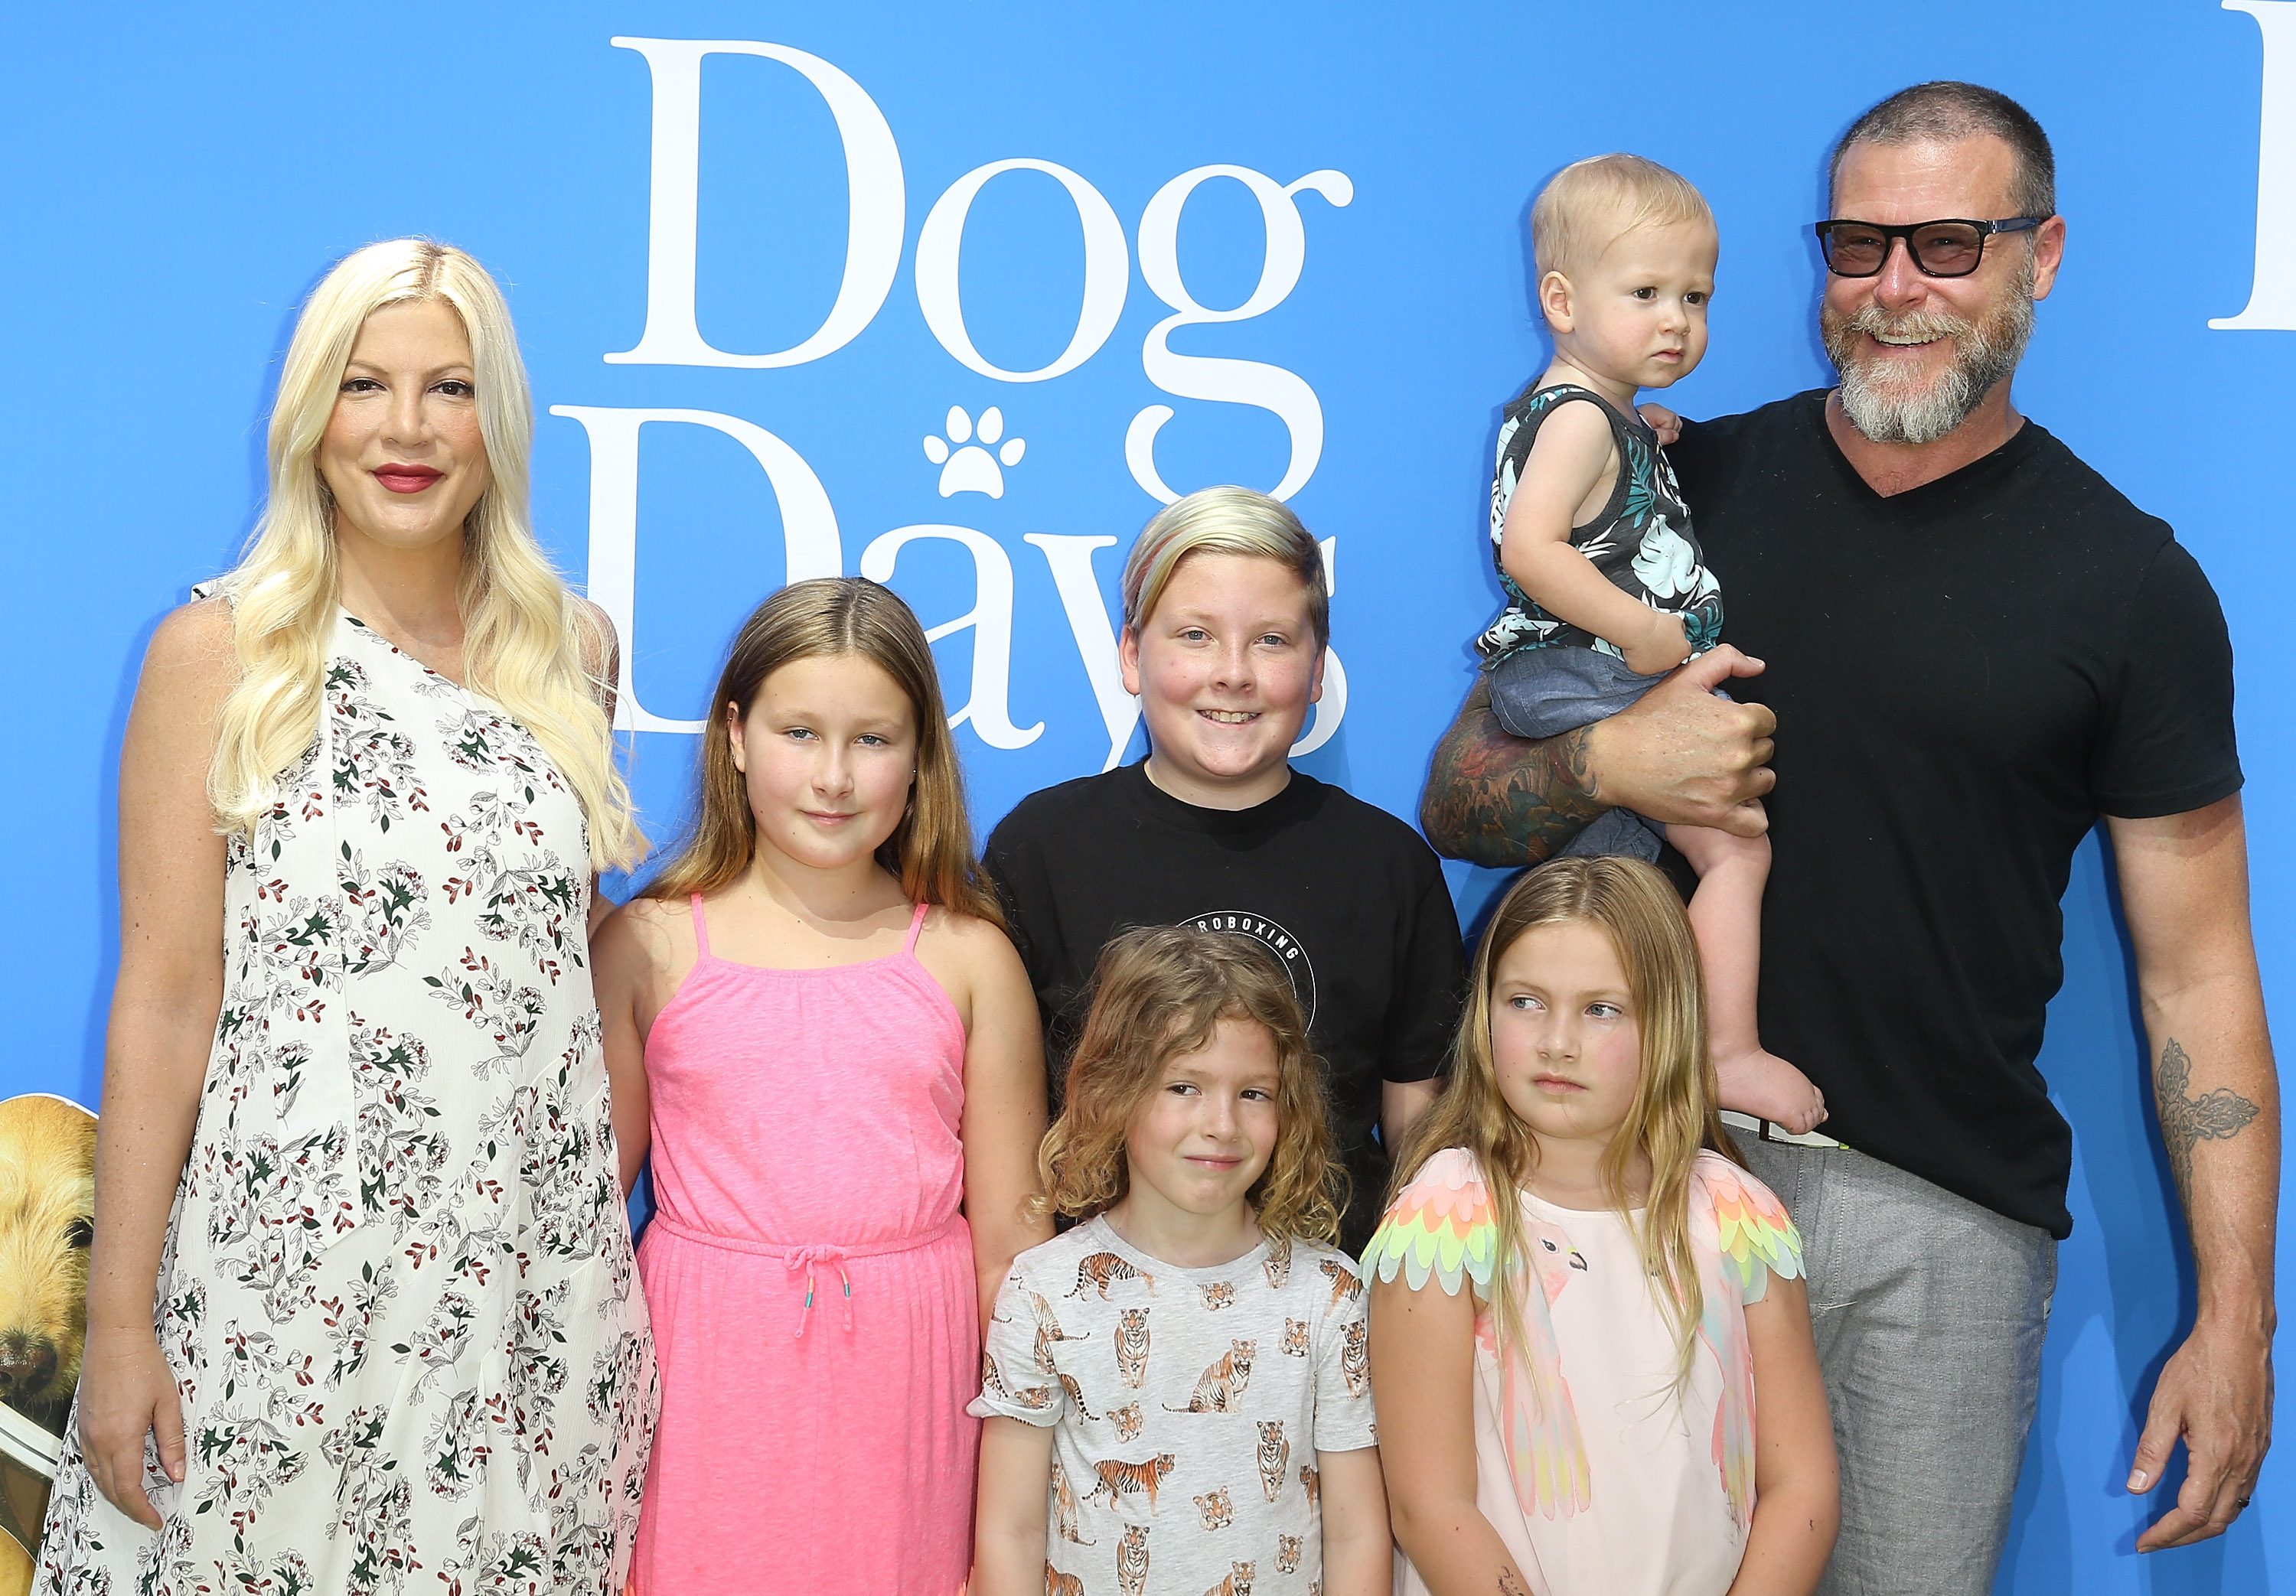 Tori Spelling and Dean McDermott with all their kids at the premiere of "Dog Days" in Century City, California on August 5, 2018  | Source: Getty Images